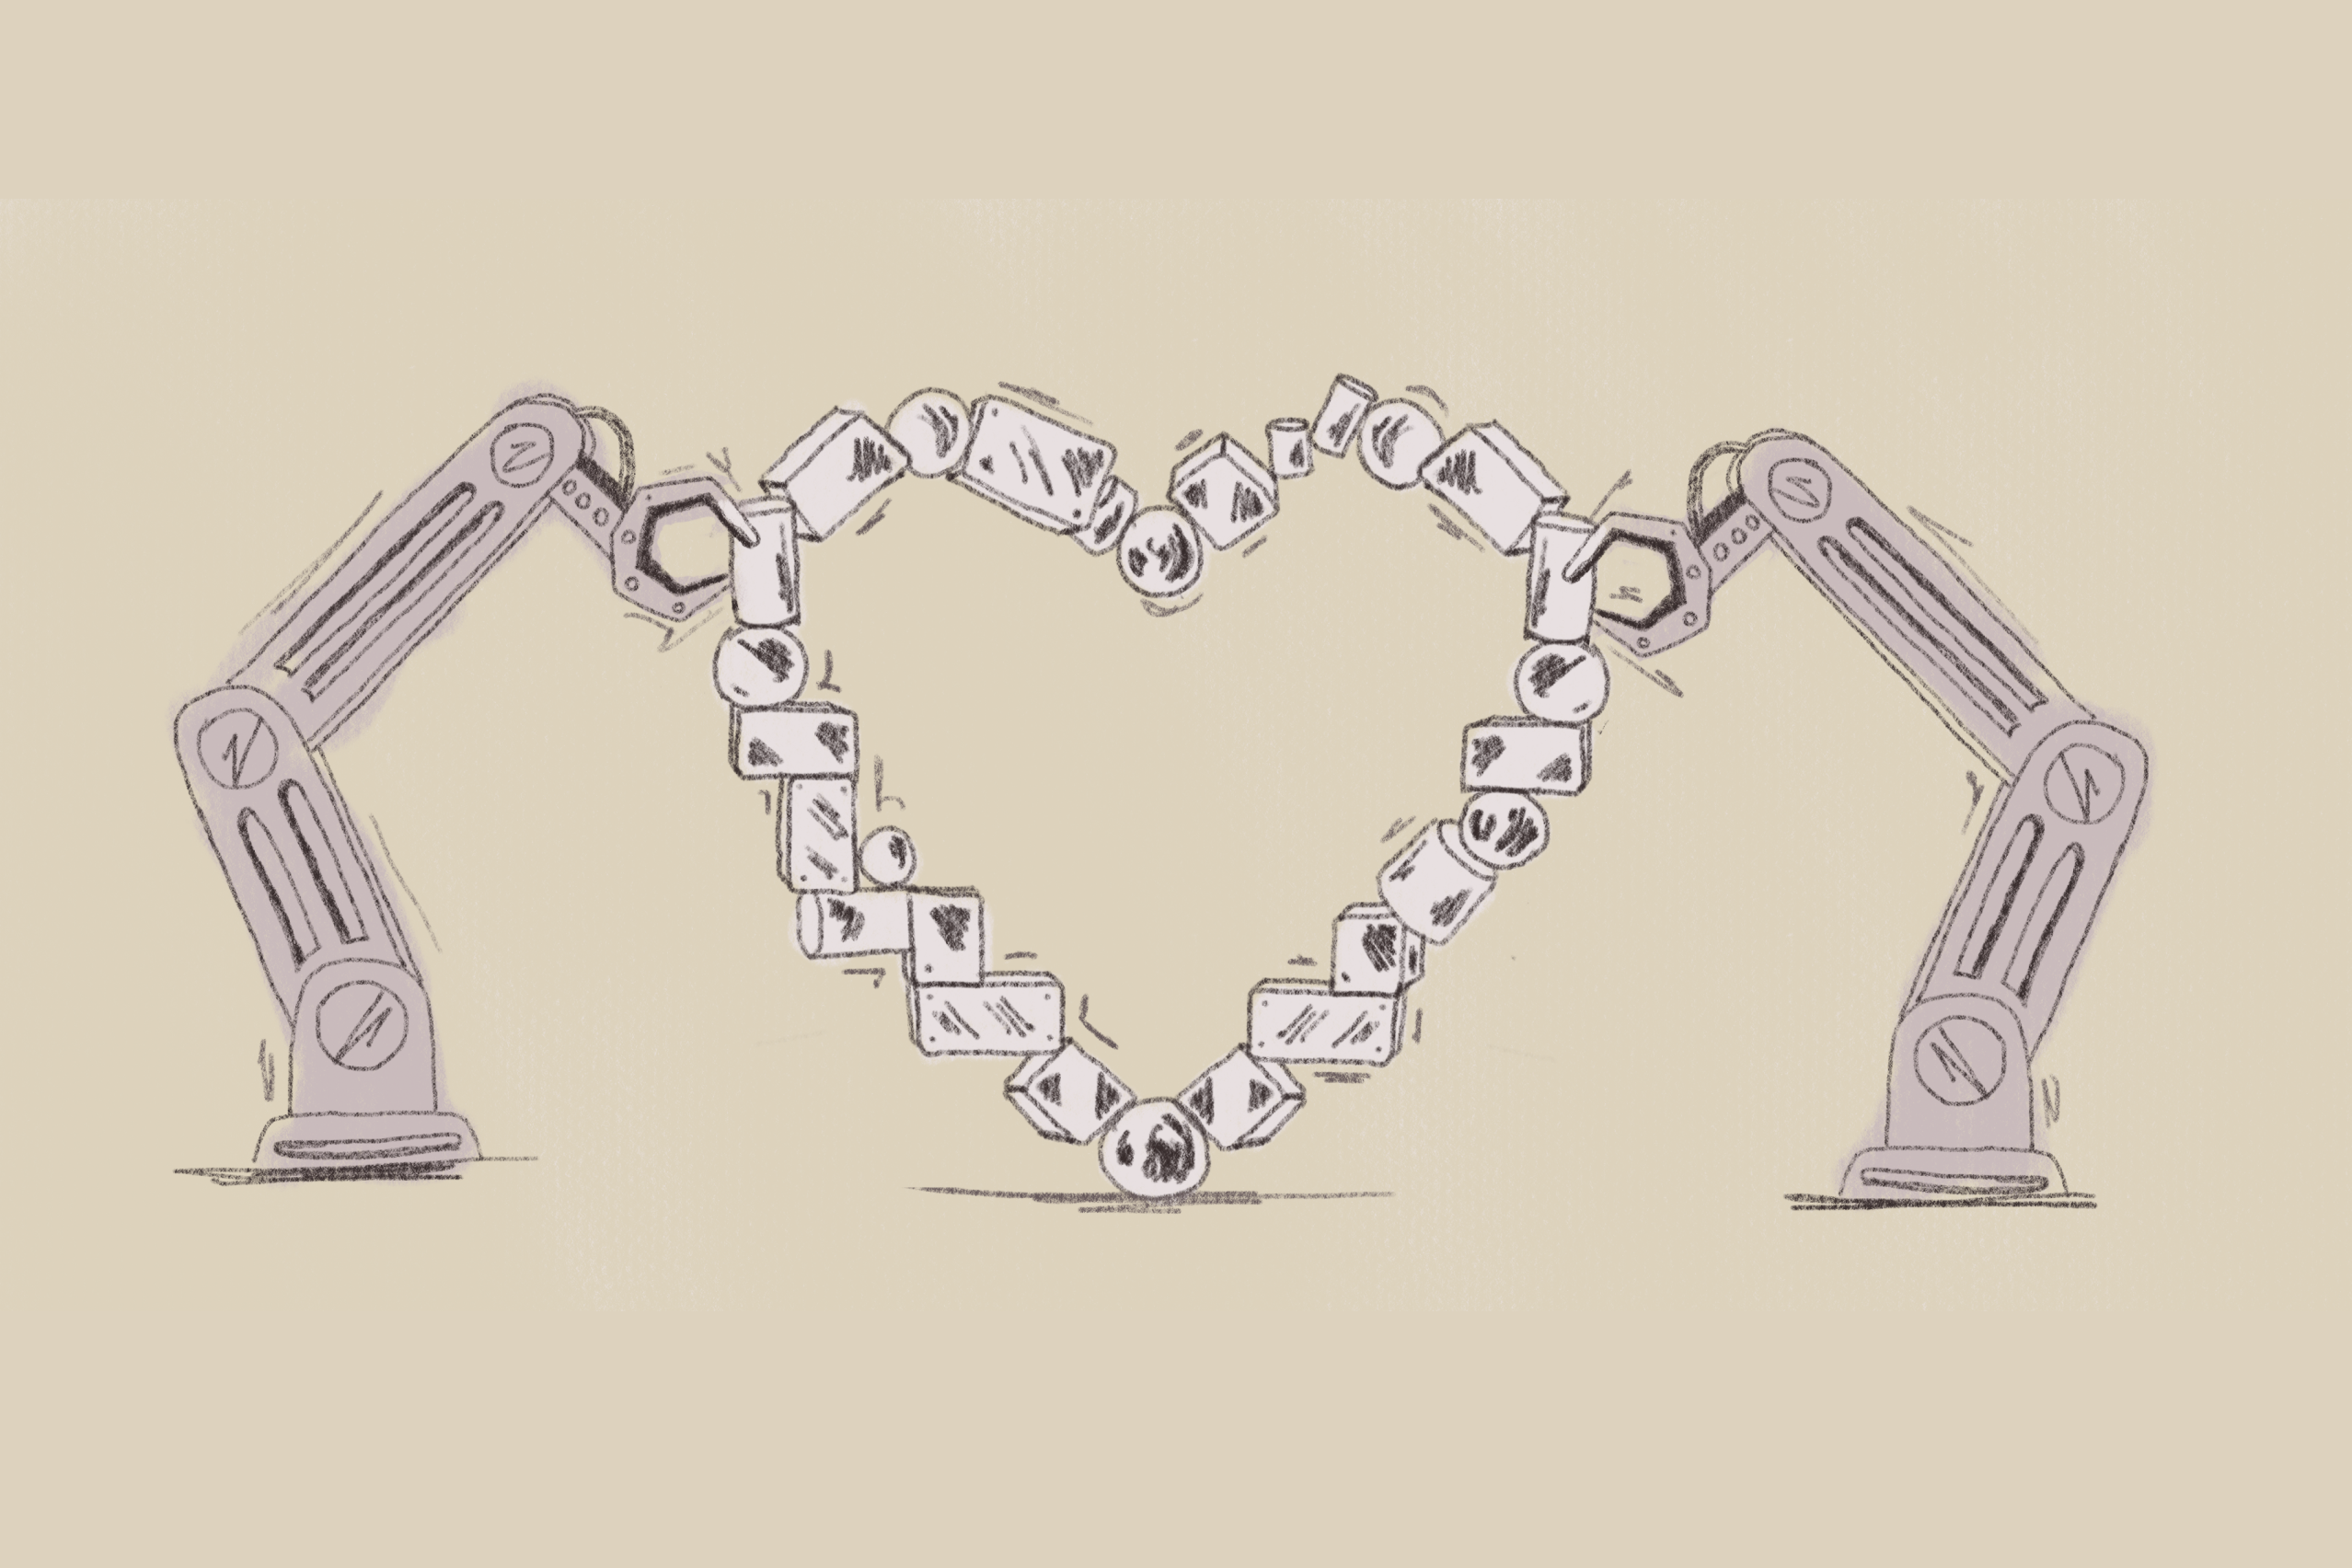 image of two robot arms assembling a heart